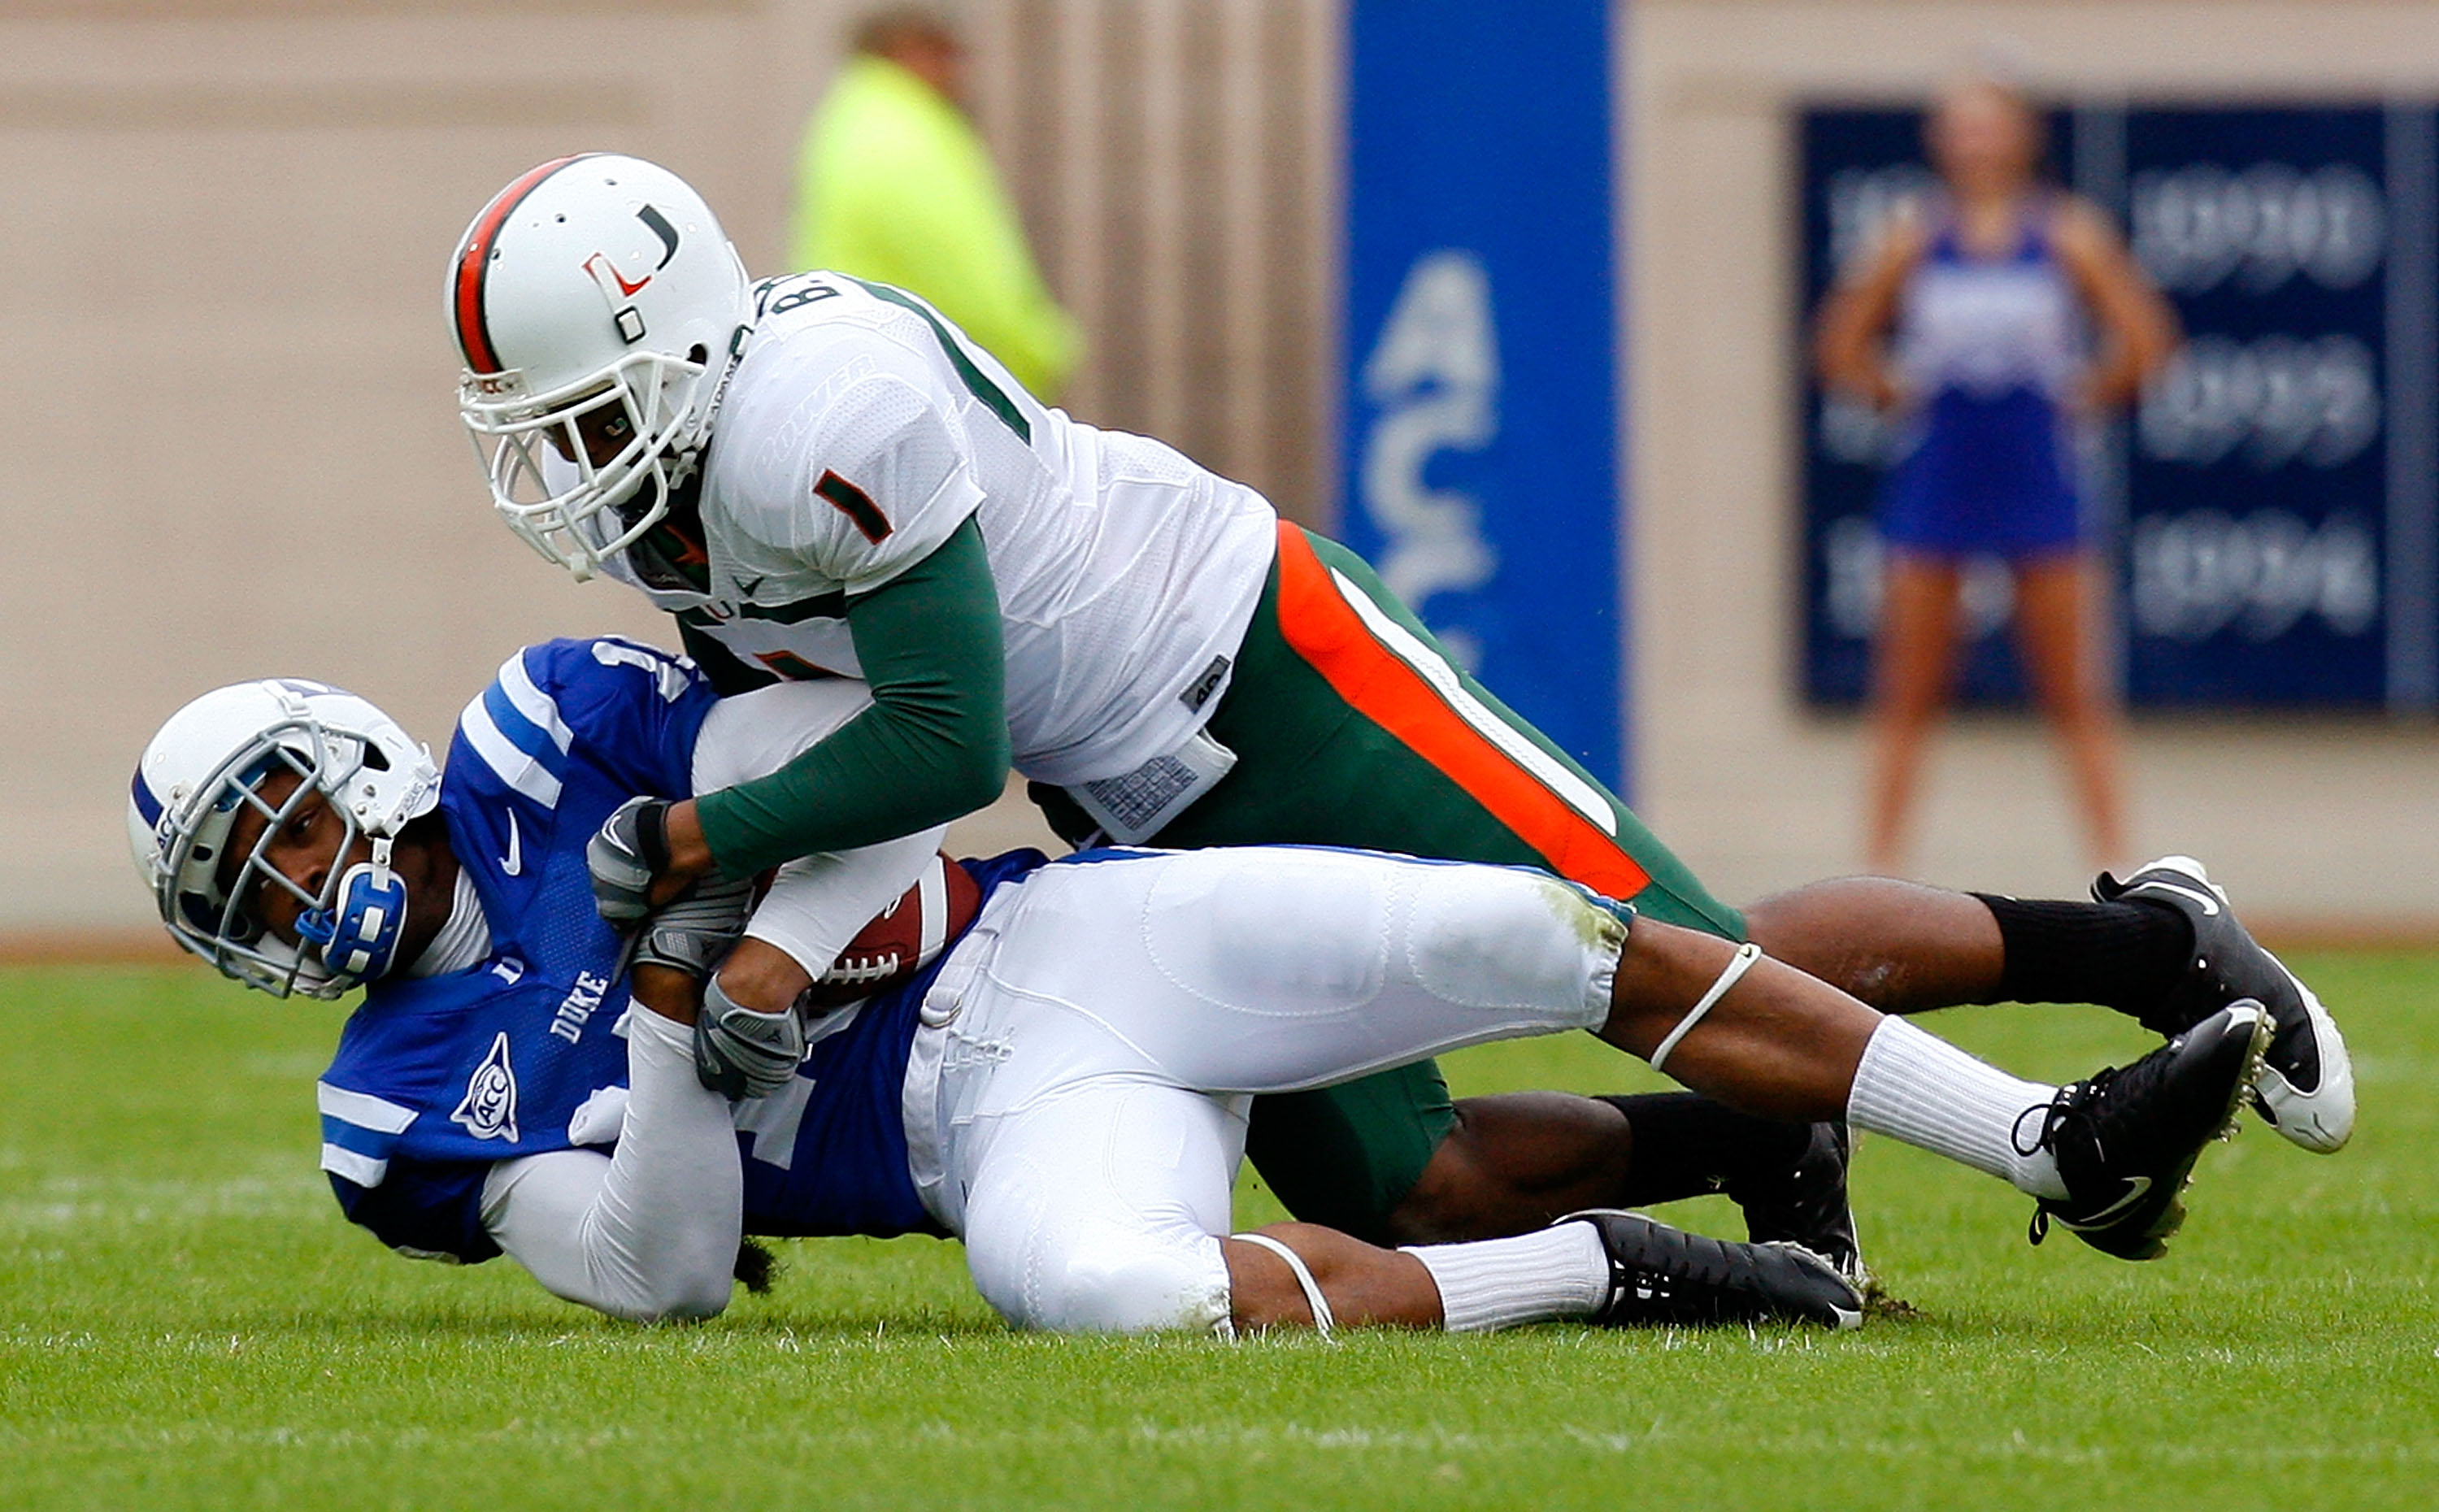 DURHAM, NC - OCTOBER 18:  Receiver Eron Riley #15 of the Duke Blue Devils pulls in this reception against Brandon Harris #1 of the Miami Hurricanes during the game at Wallace Wade Stadium on October 18, 2008 in Durham, North Carolina.  (Photo by Kevin C.